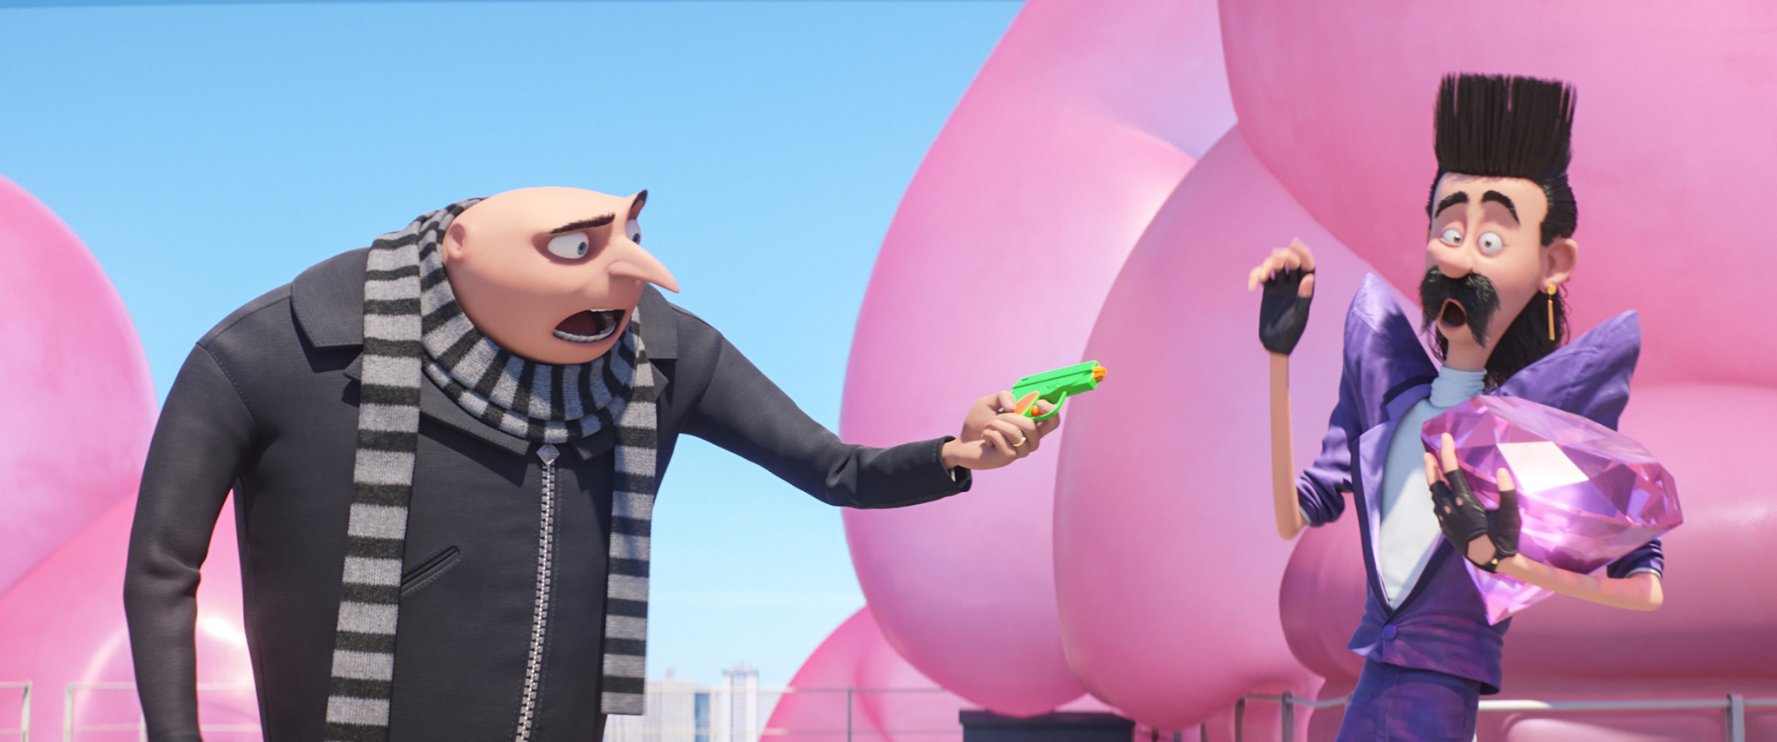 Watch Despicable Me 3